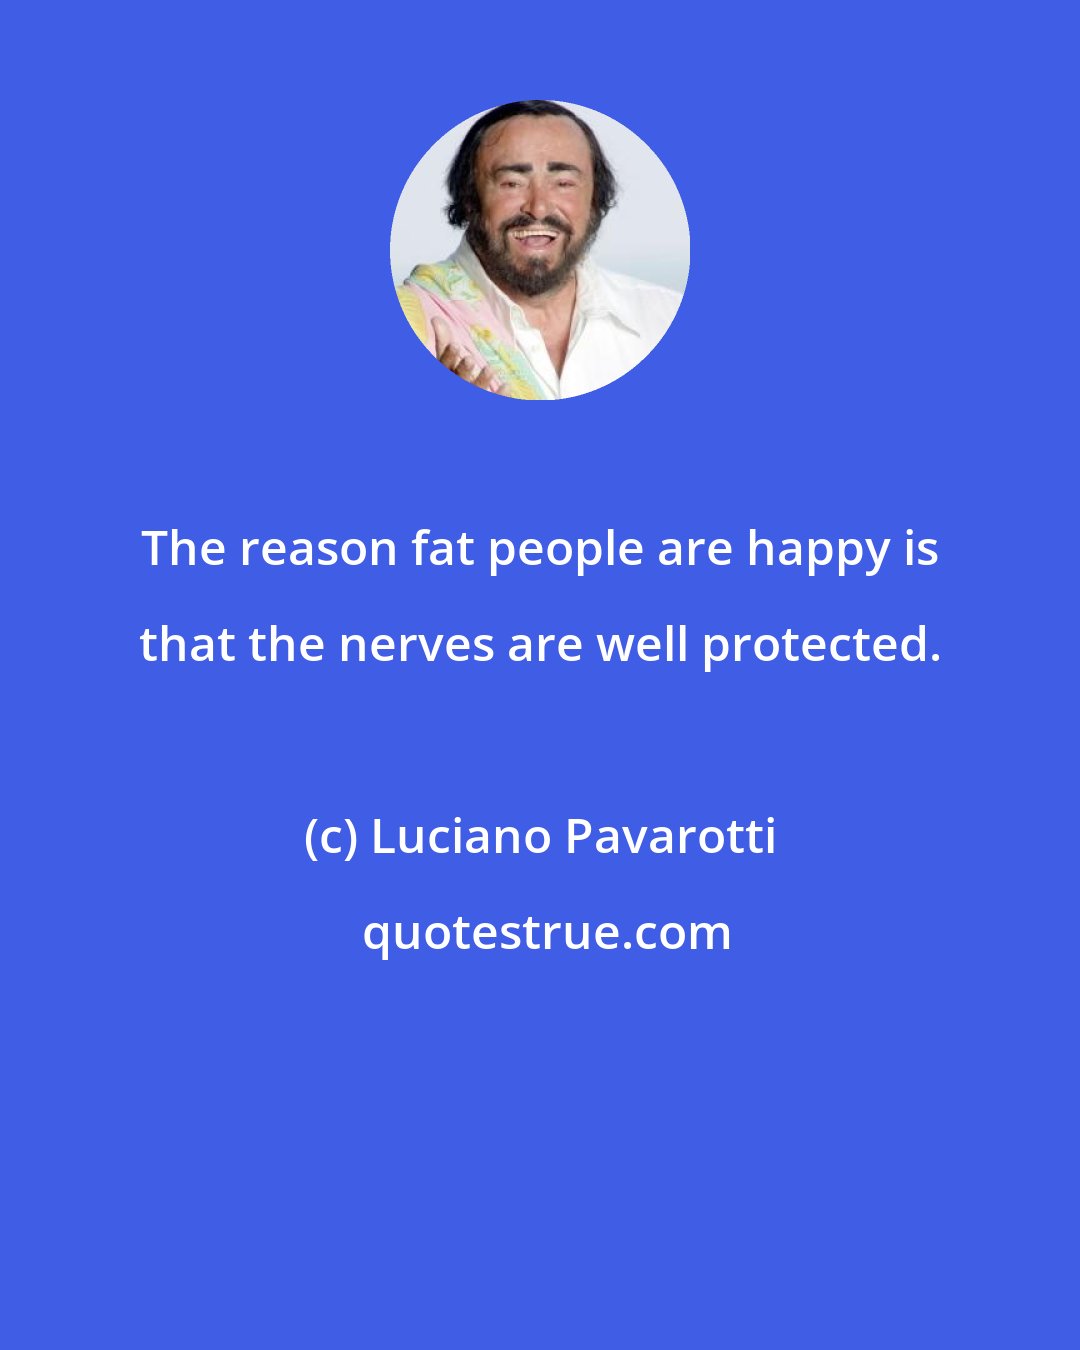 Luciano Pavarotti: The reason fat people are happy is that the nerves are well protected.